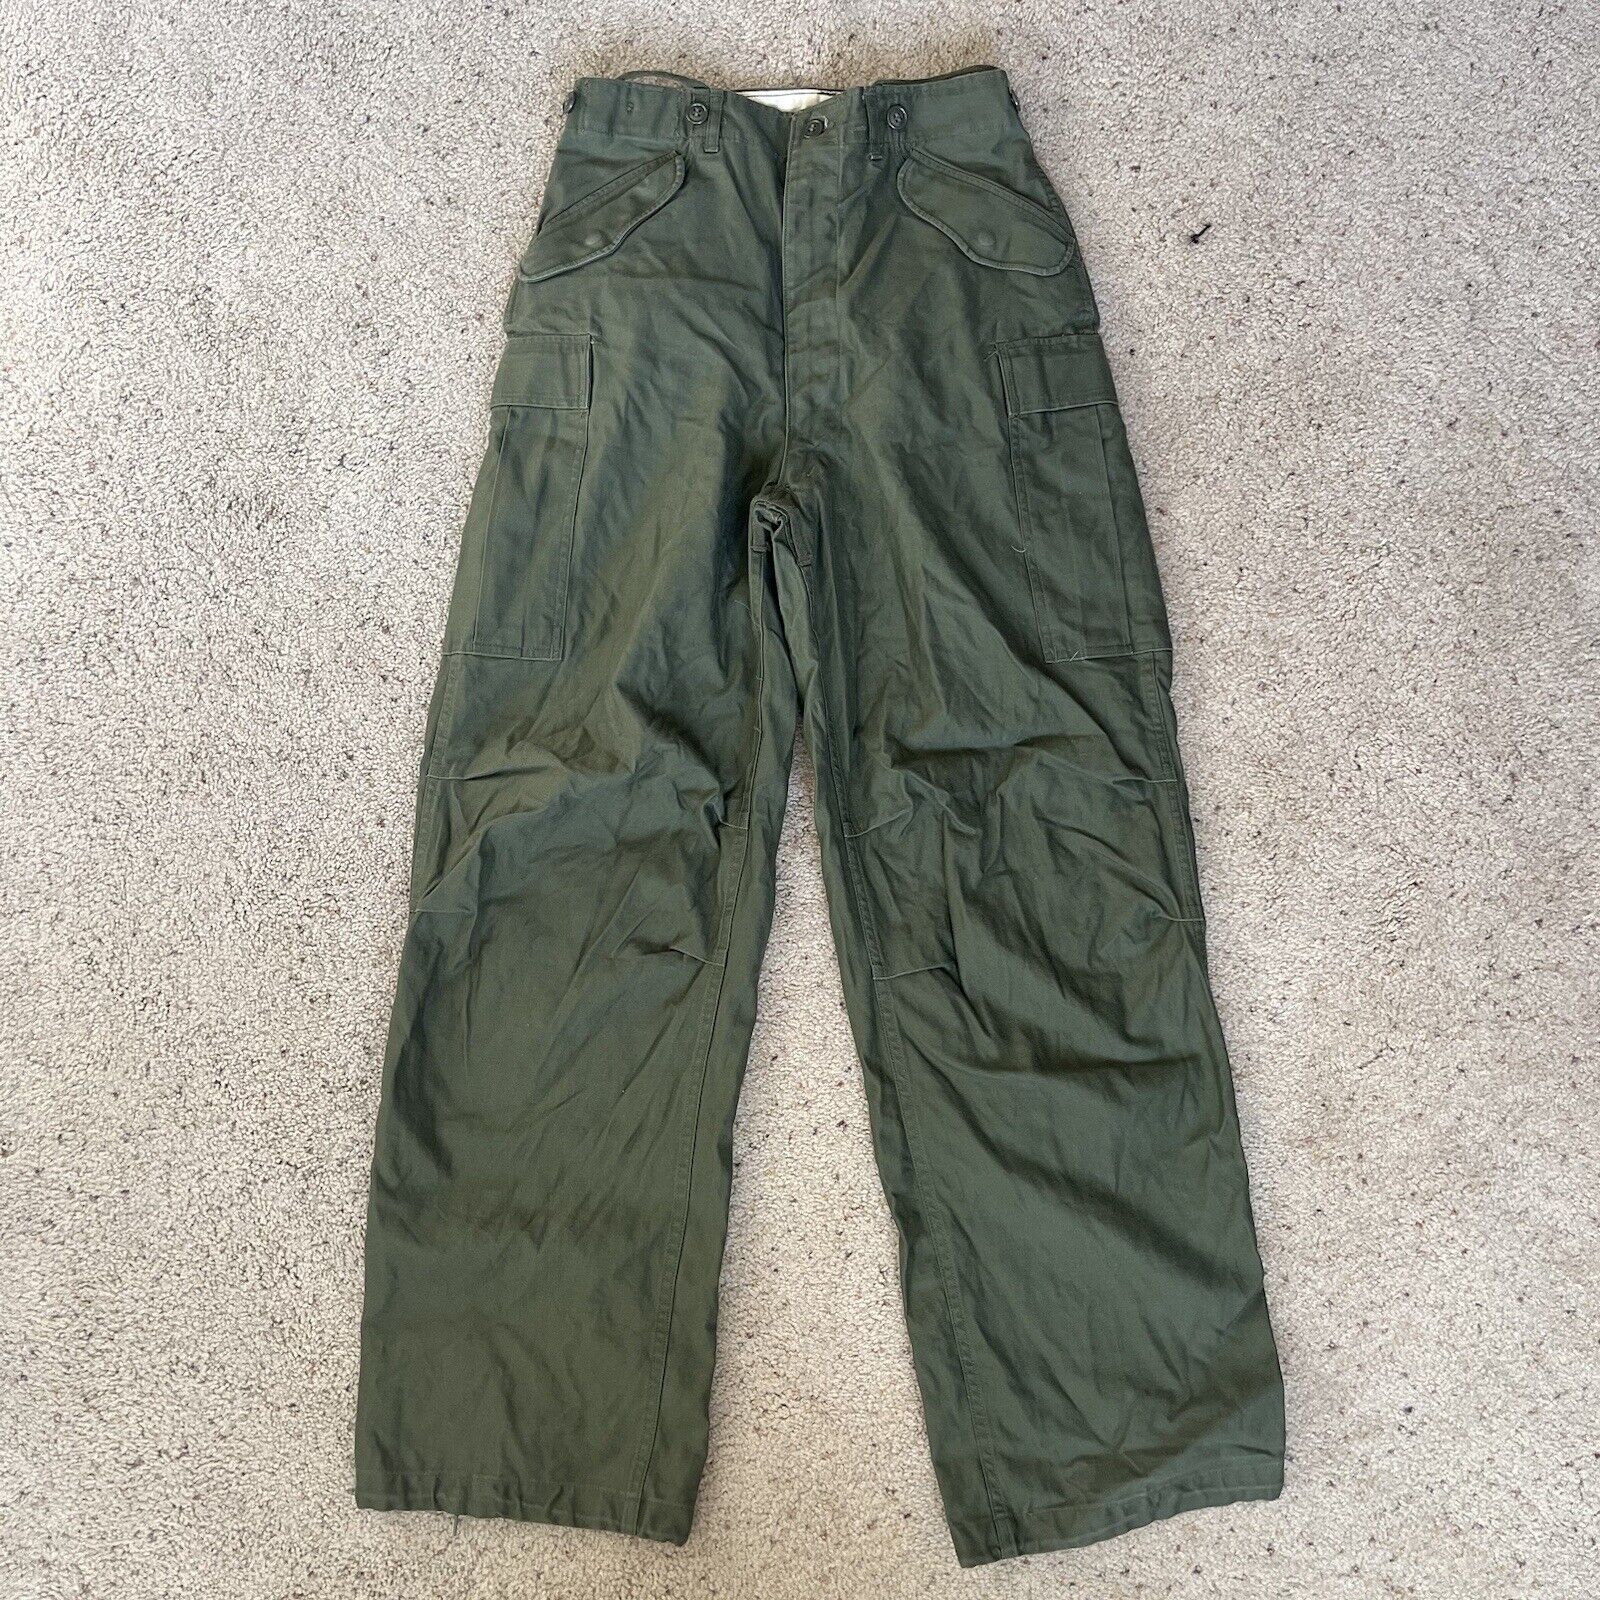 Vintage 1950's US ARMY Type II Trousers Sateen John Ownbey Co. Size Long Small